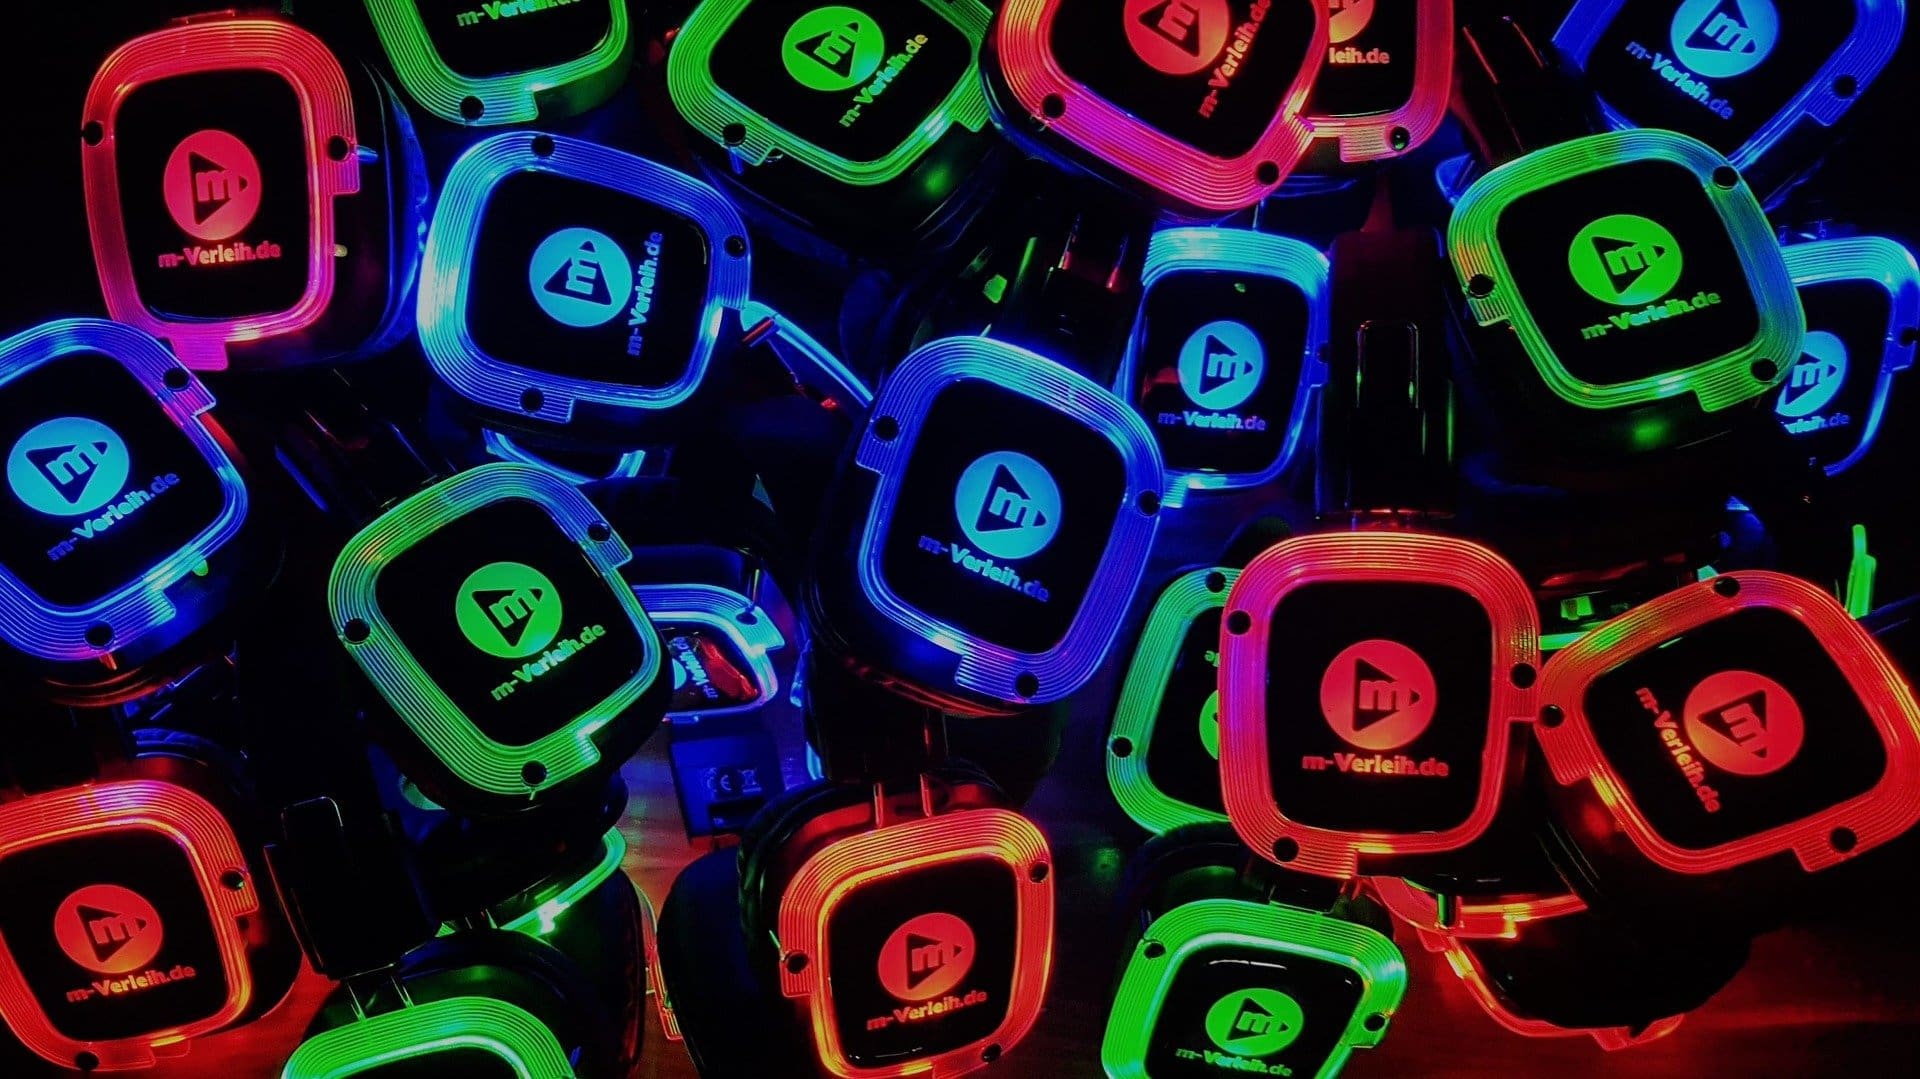 What Is a Silent Disco and What Are the Advantages?